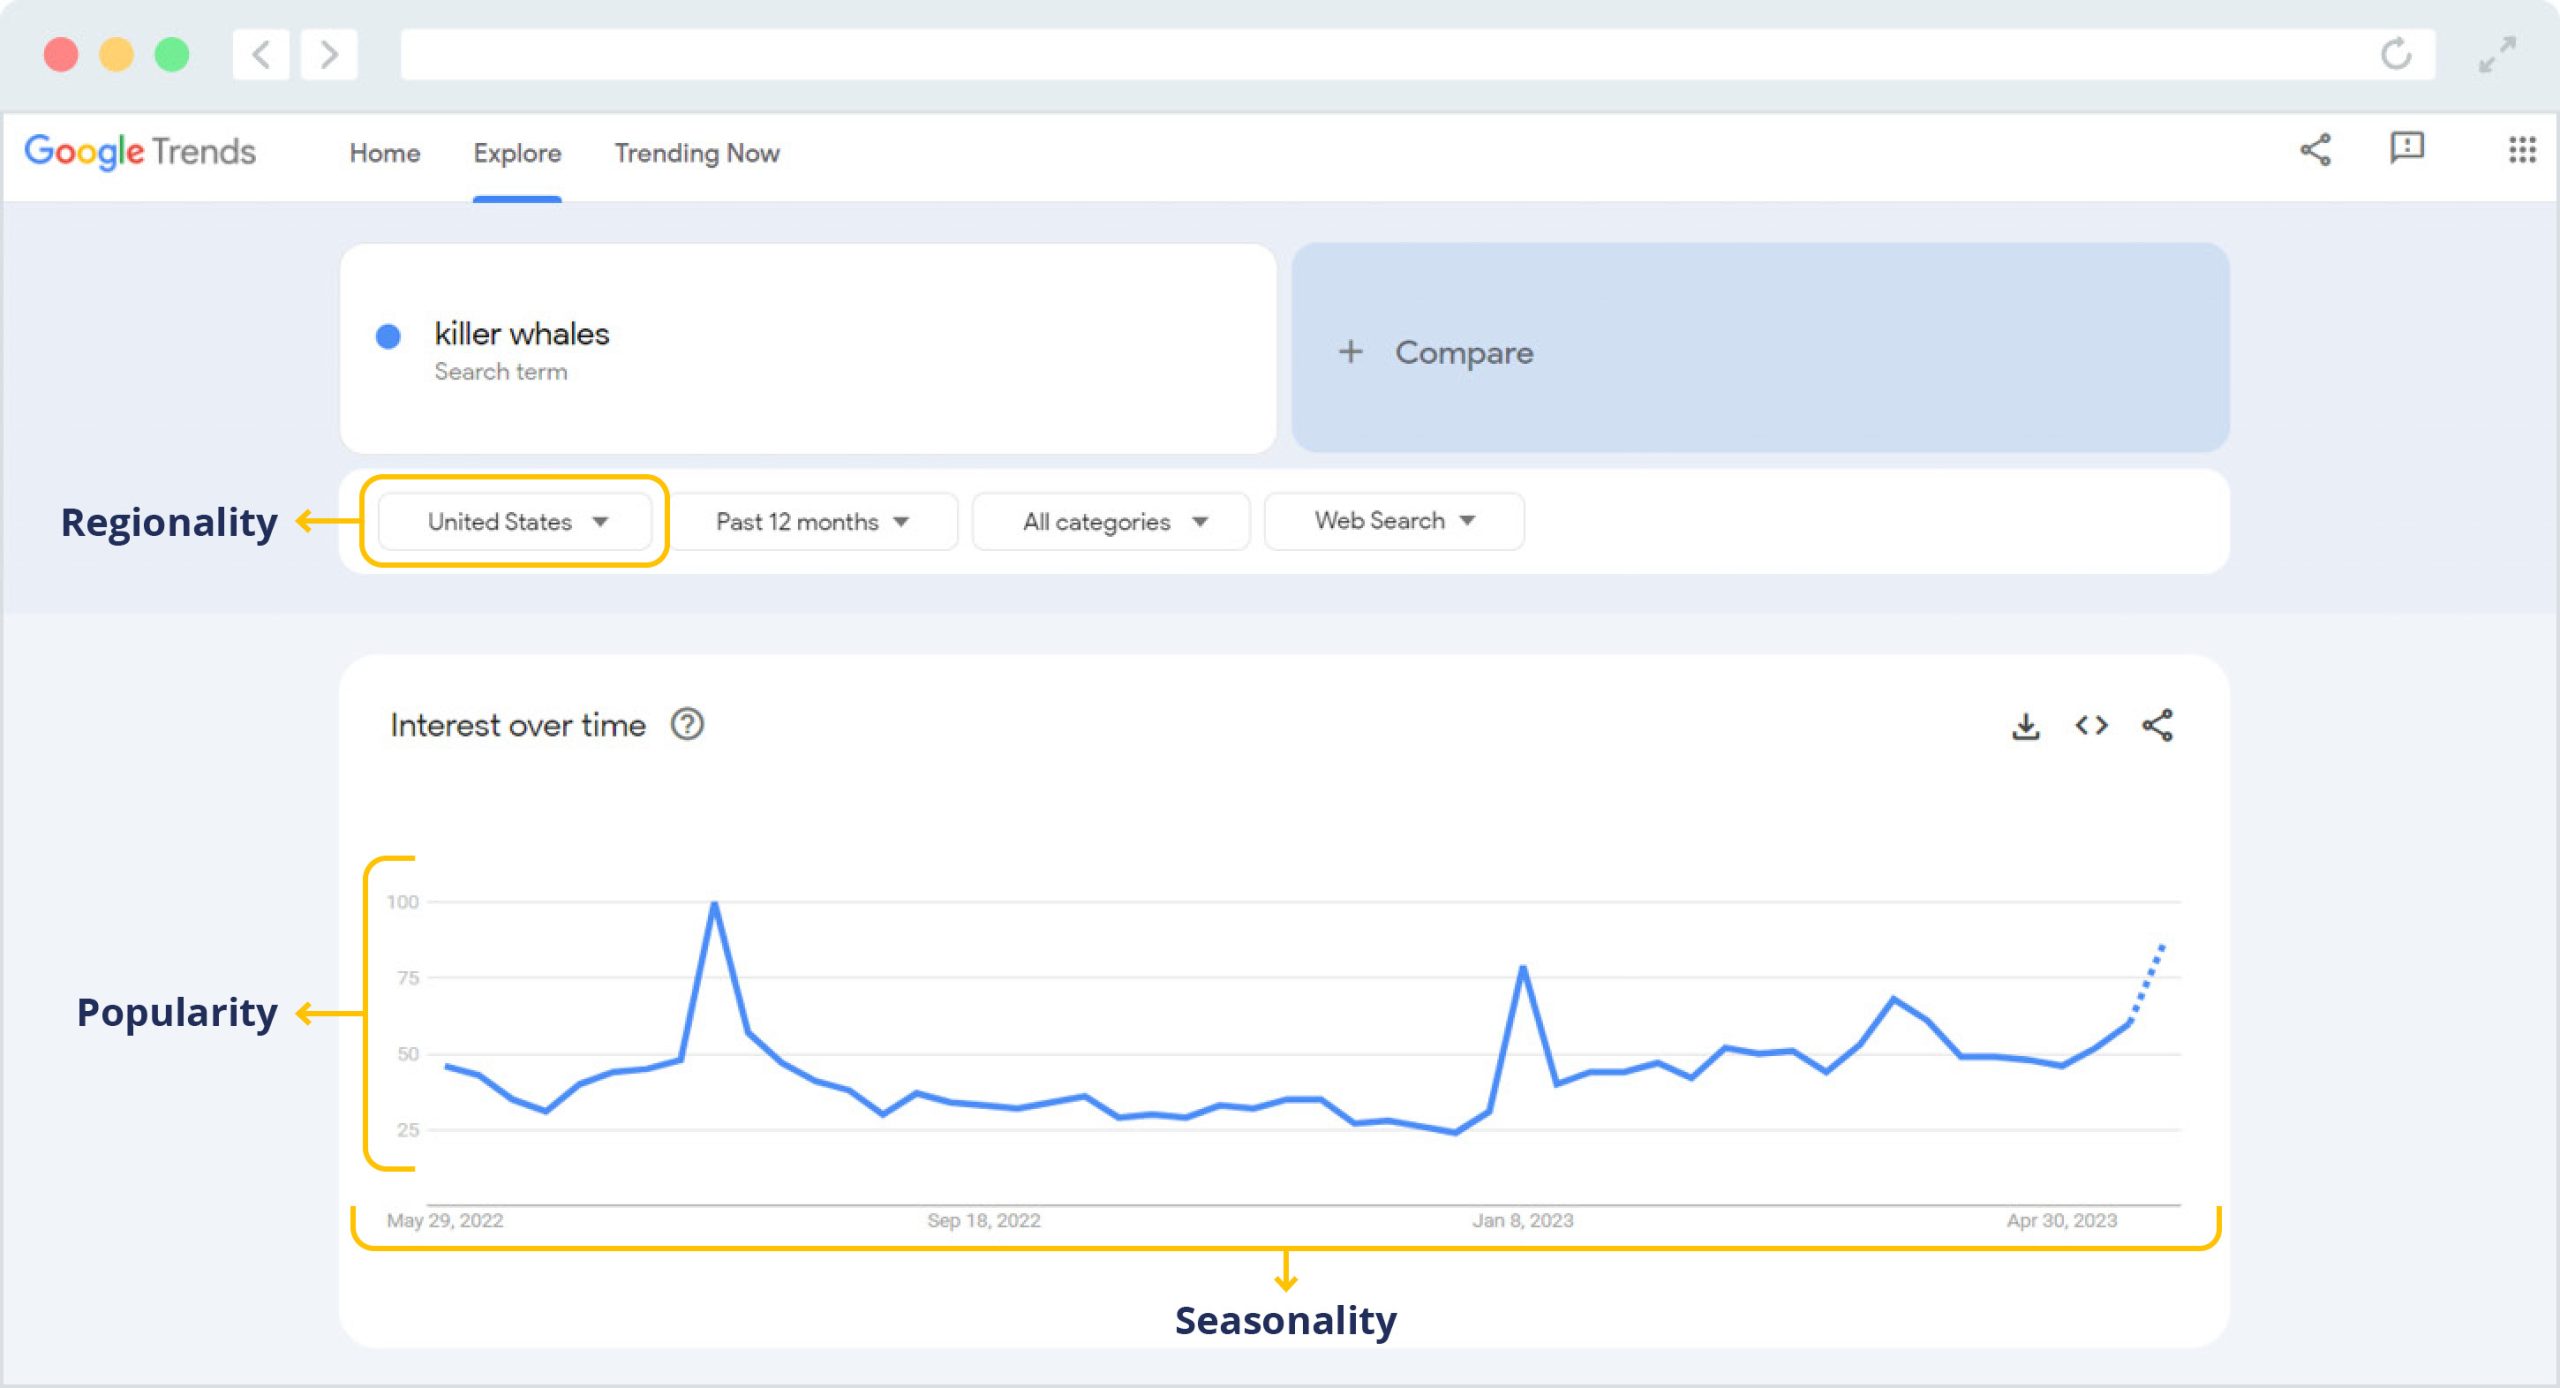 Google Trends gives you insight into trending topics to help you find the right Google Ad Grants keywords.